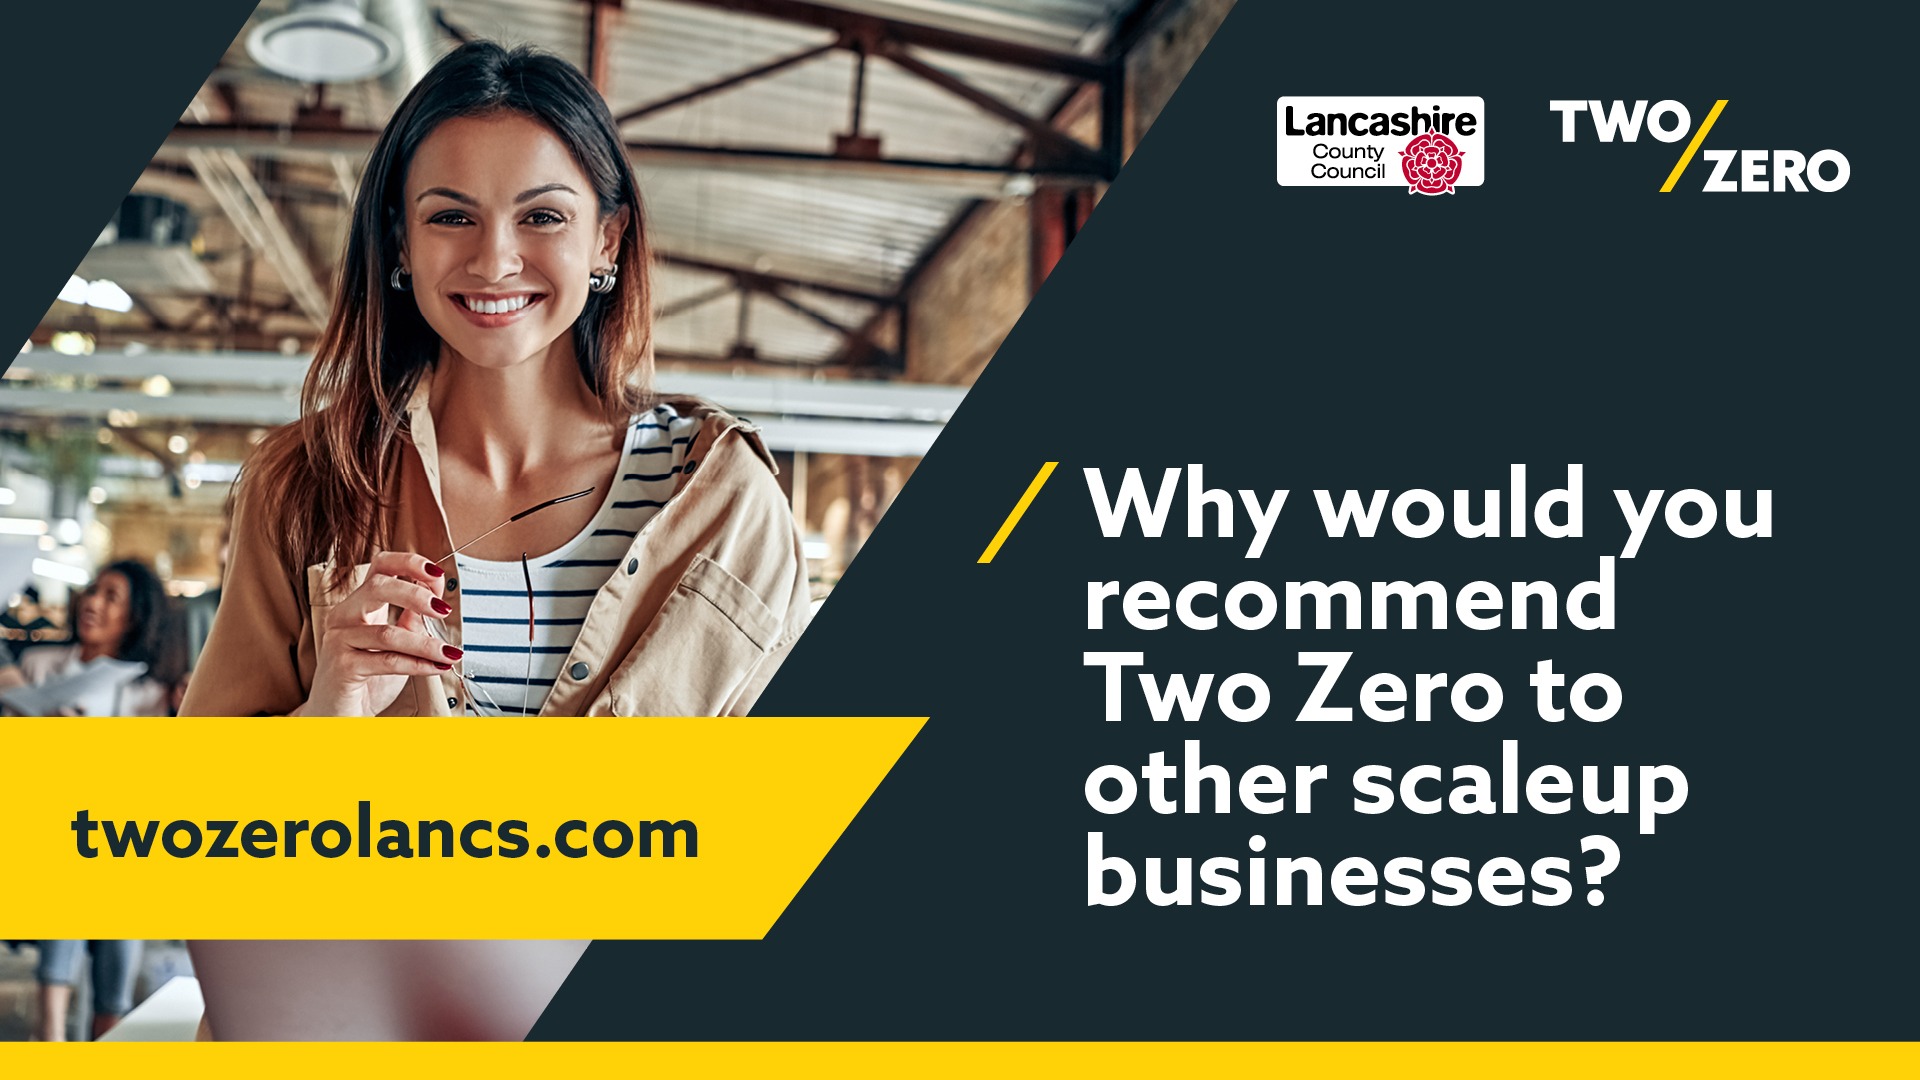 Why would you recommend Two Zero to other scaleup businesses?